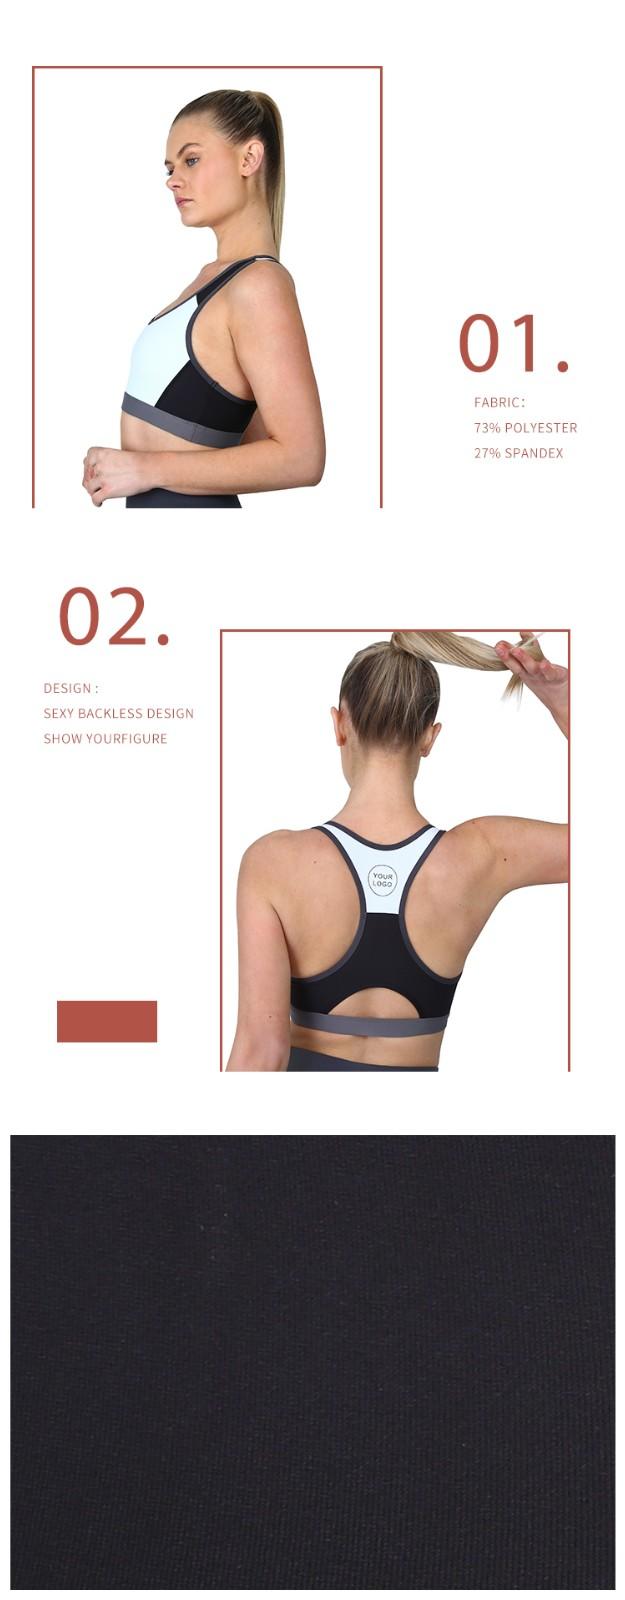 INGOR plain d cup sports bra on sale at the gym